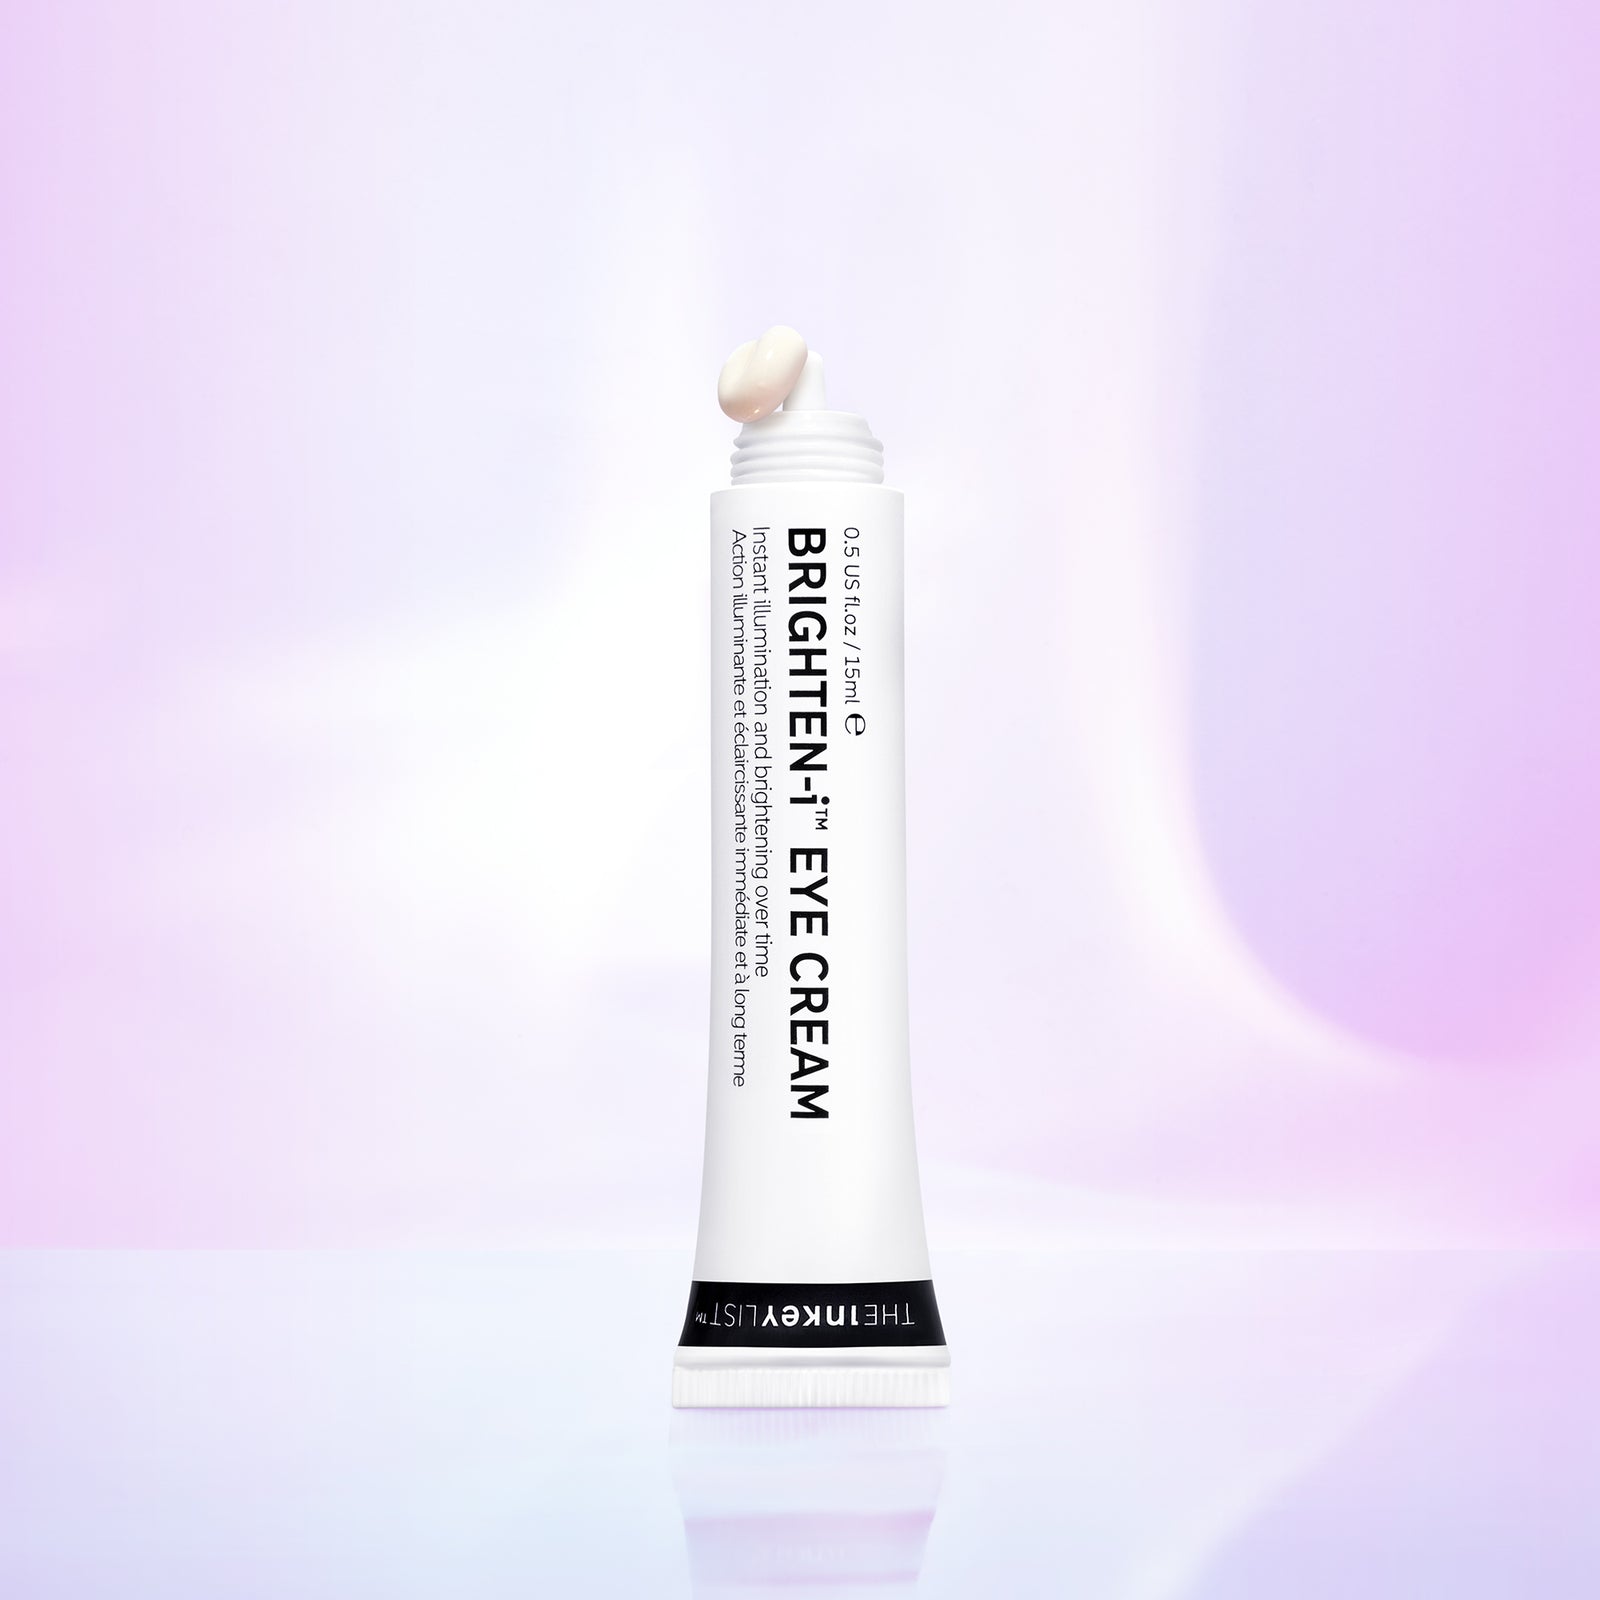 Pack shot of Brighten-I Eye Cream without the lid on pink background